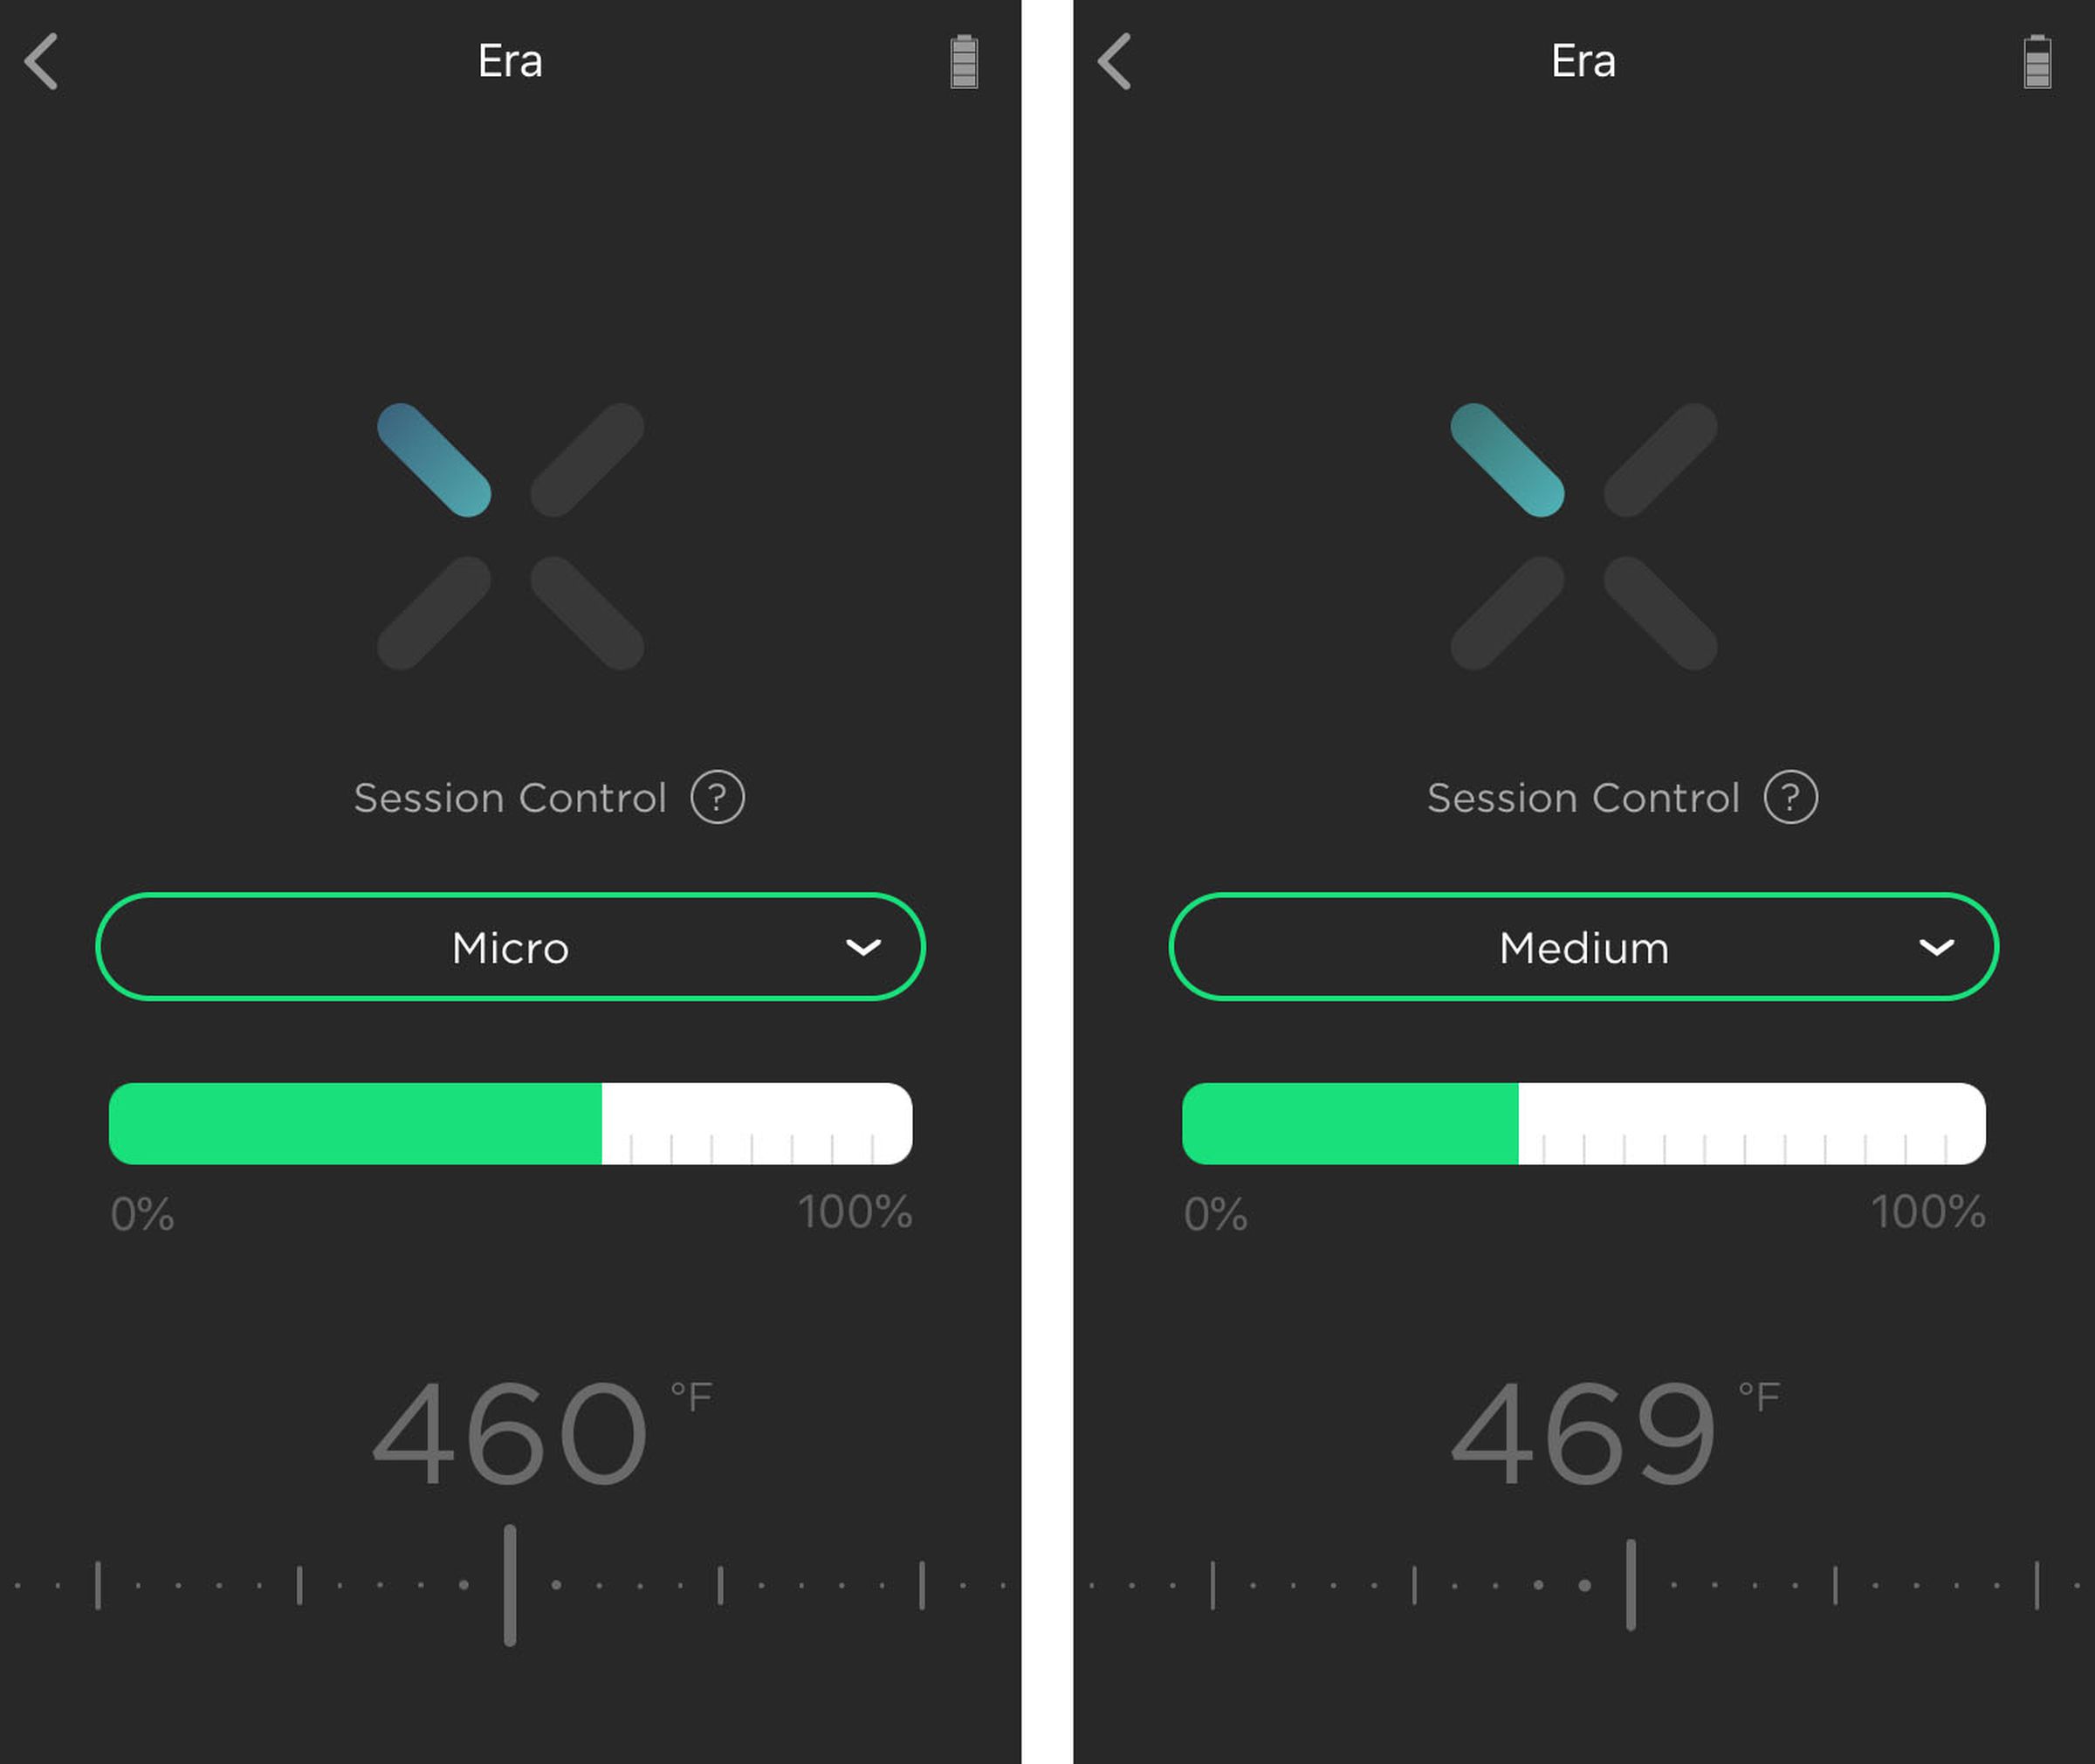 Dosing control interface in the Pax app for iOS.